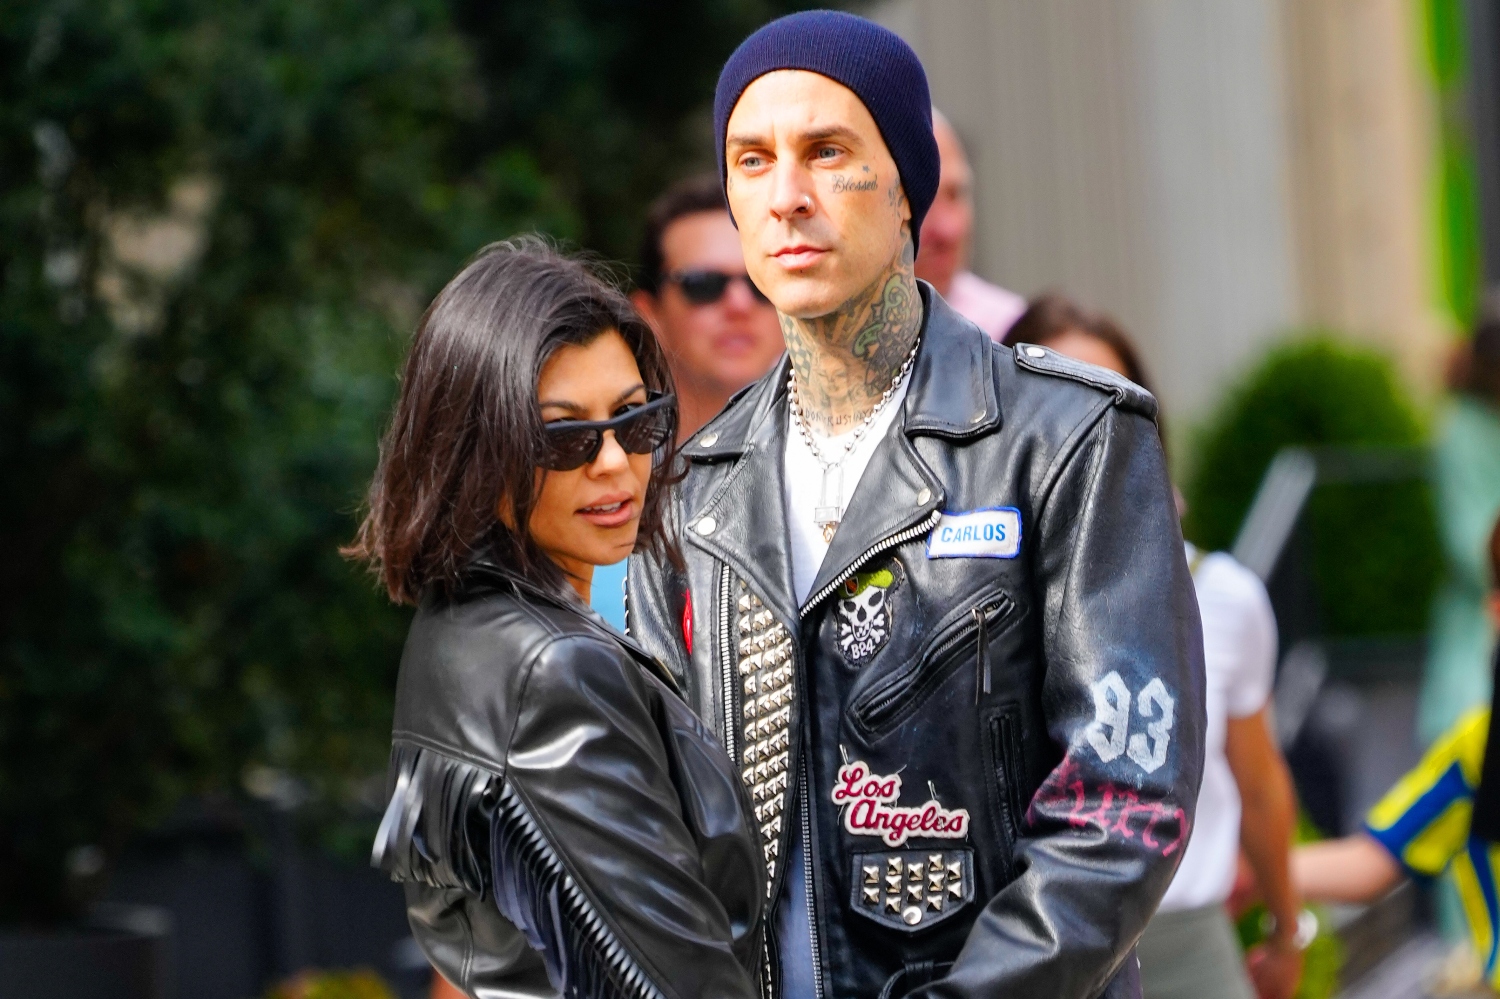 Travis Barker and Kourtney Kardashian embrace on the street in New York. Barker proposed to Kardashian with an oval engagement ring.